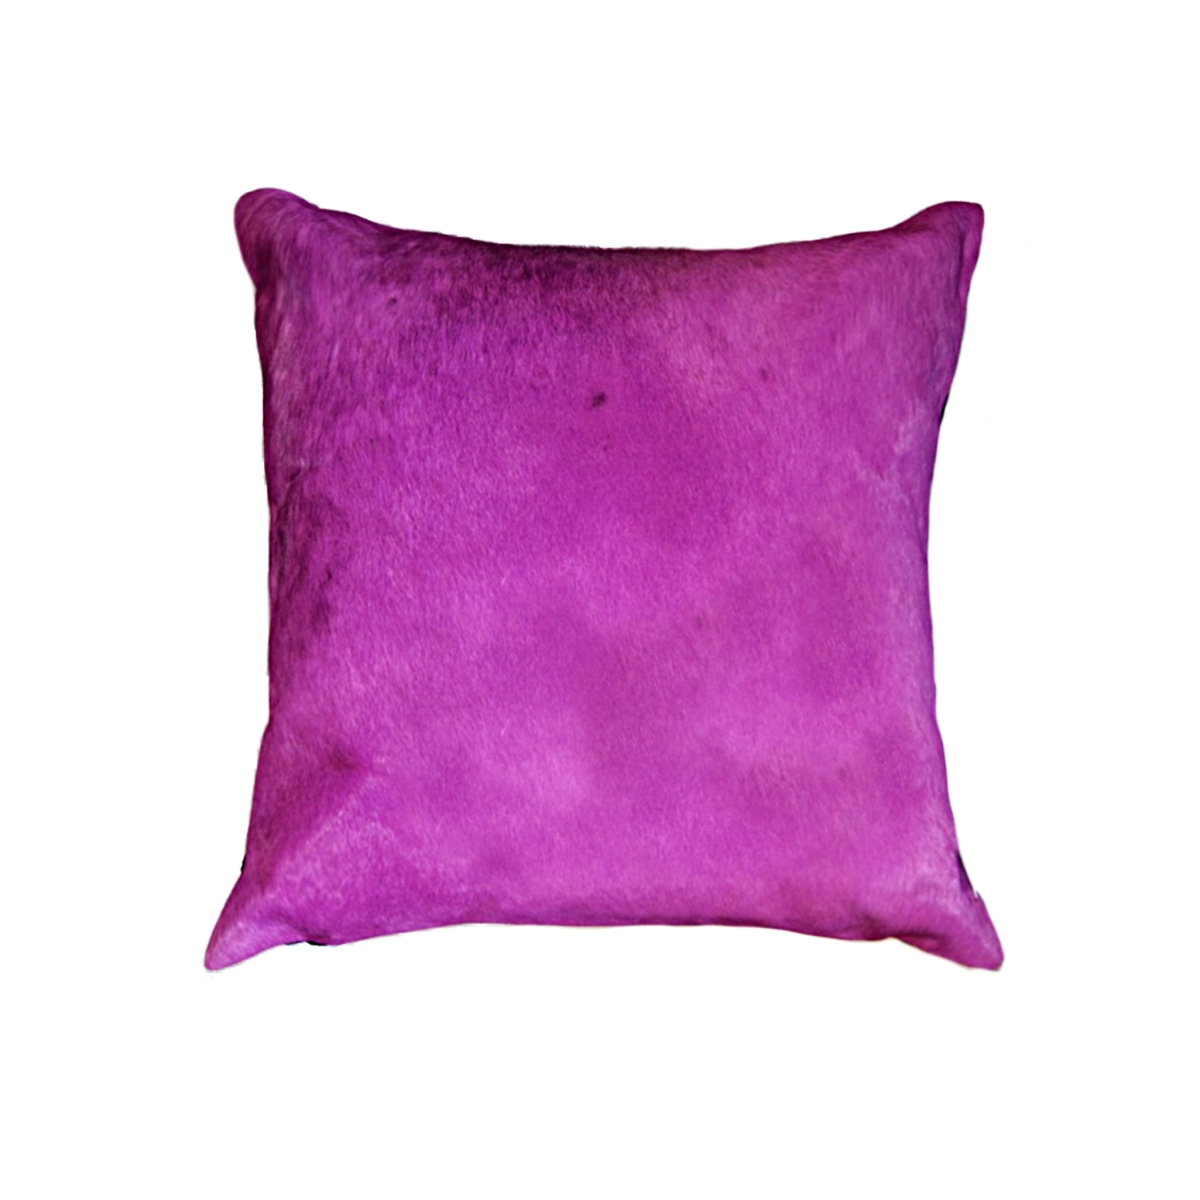 Home Roots Beddings 328254 Cowhide Pillow, Fuchsia - 18 X 18 In.